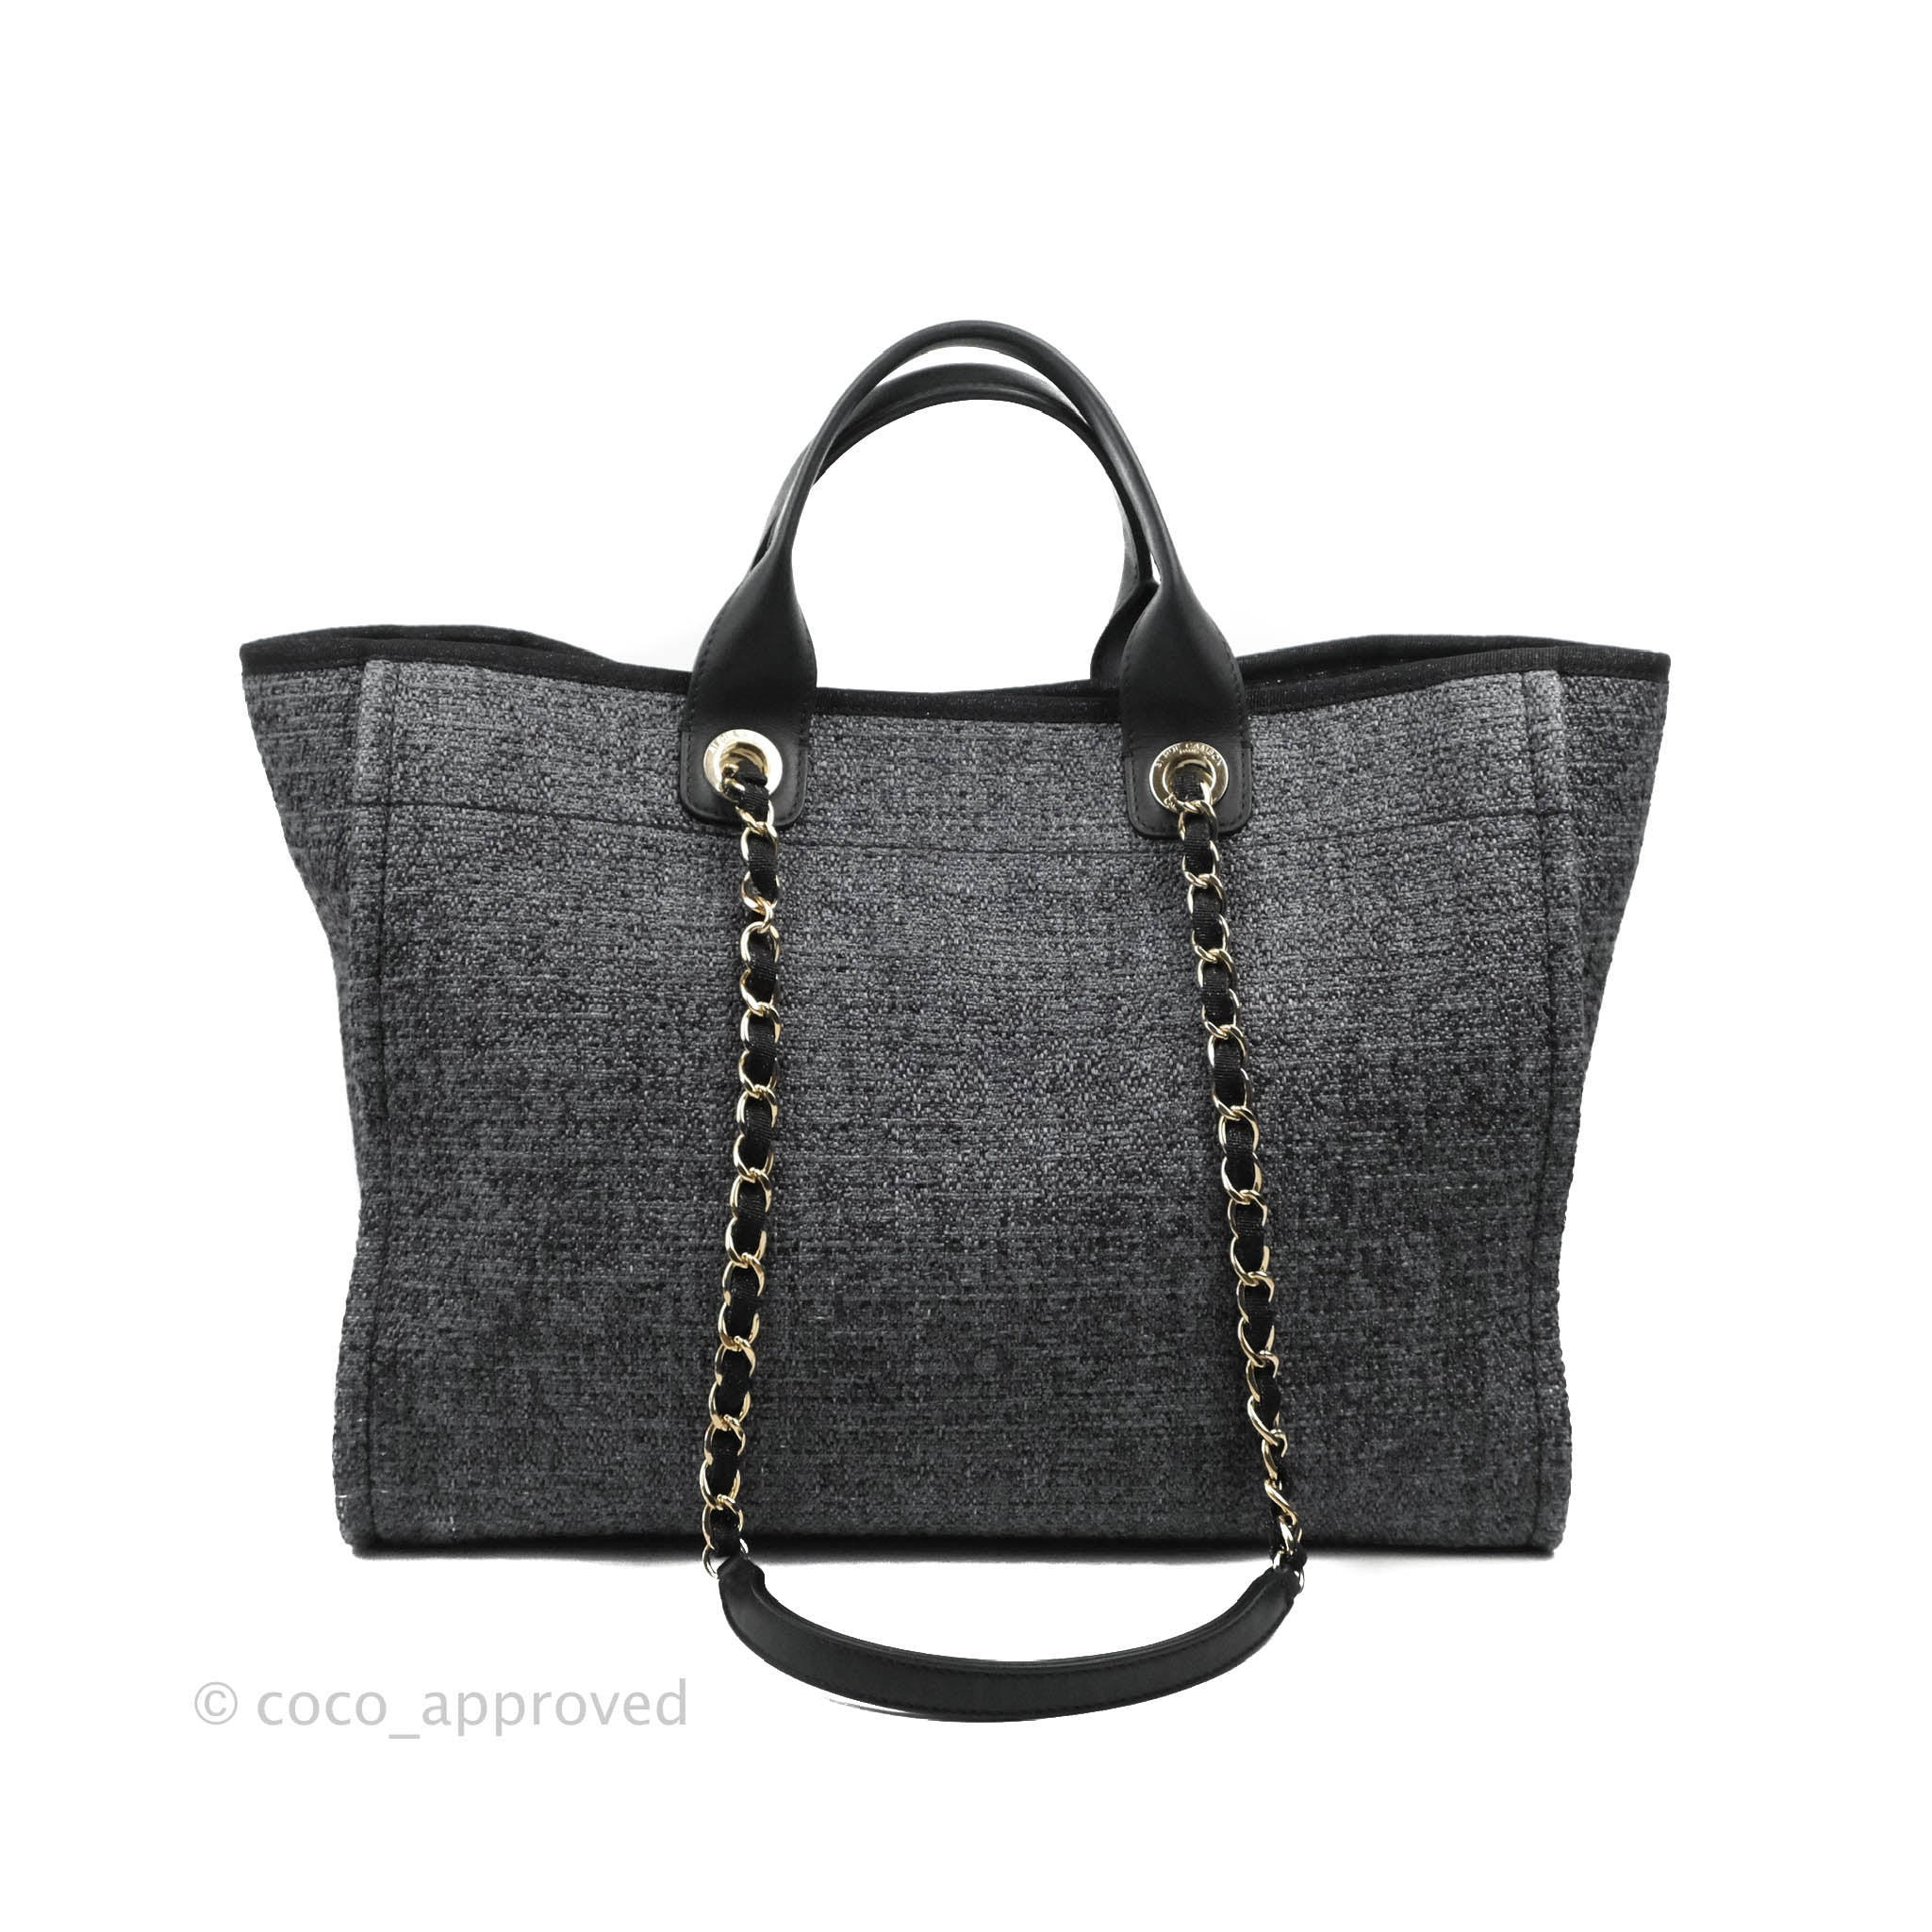 Chanel Quilted Drawstring Shopping Tote Bag Metallic Dark Grey Aged Ca   Coco Approved Studio